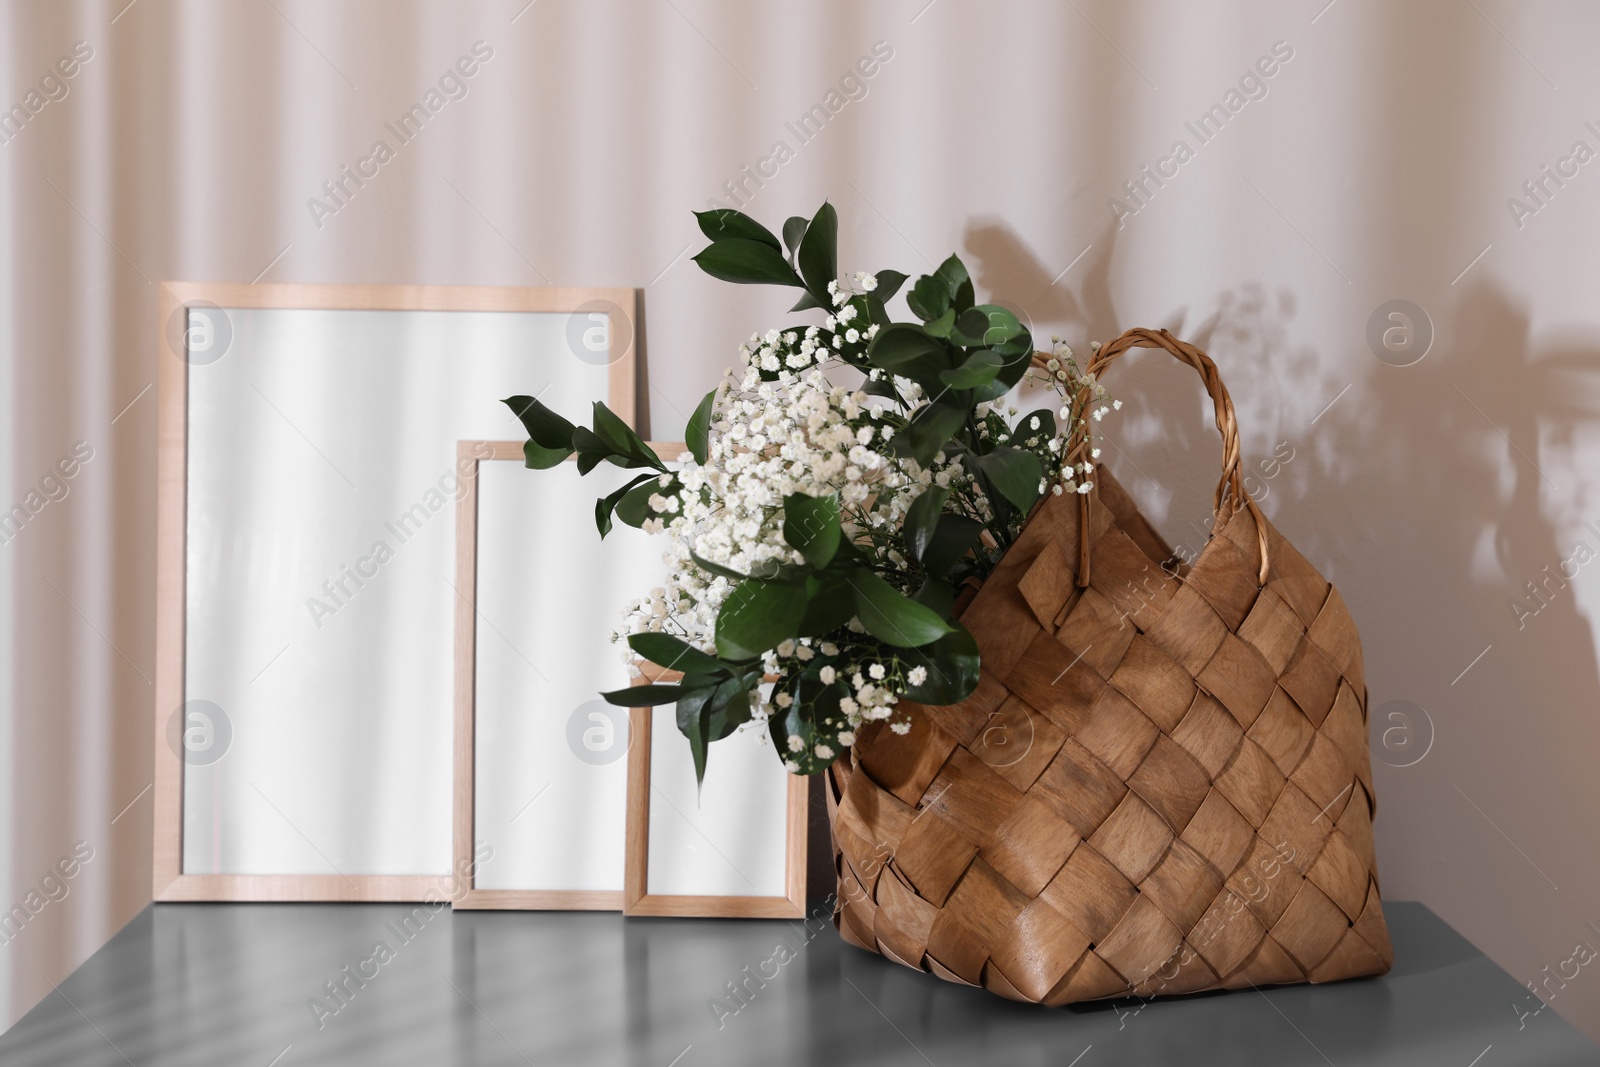 Photo of Stylish wicker basket with bouquet of flowers near empty frames on wooden table indoors